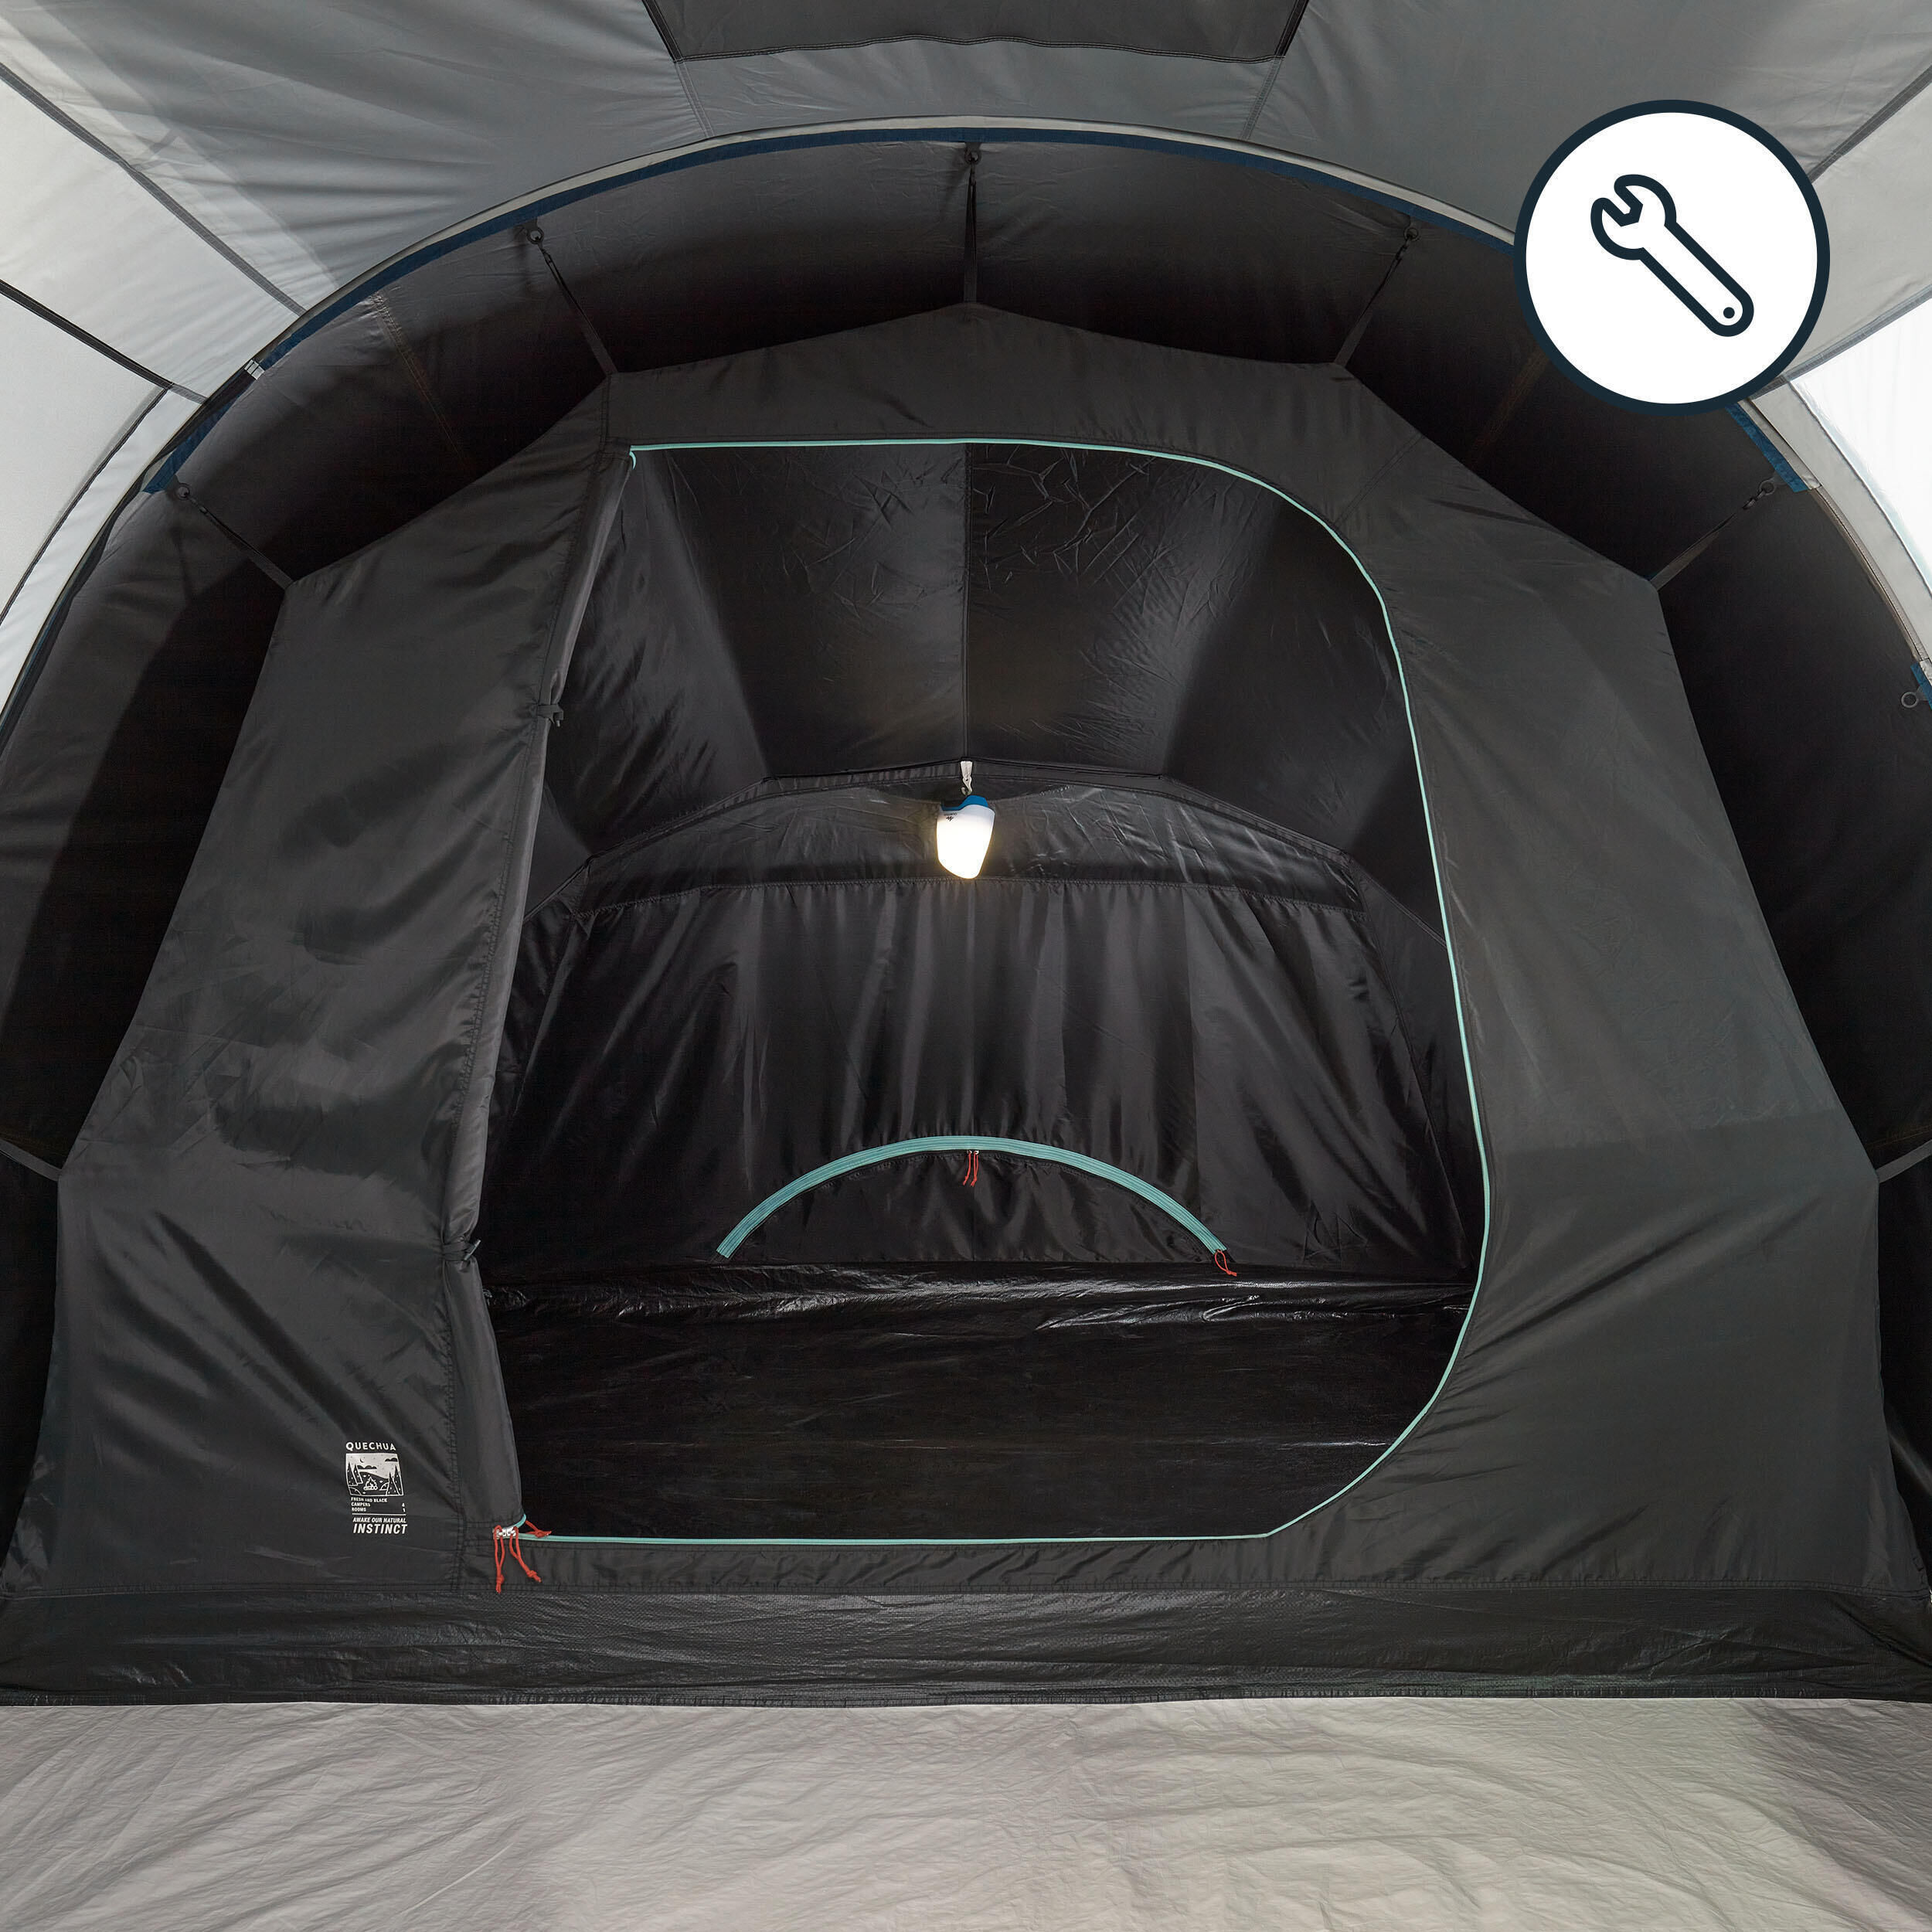 QUECHUA BEDROOM AND GROUNDSHEET - SPARE PART FOR THE ARPENAZ 4.1 FRESH&BLACK TENT